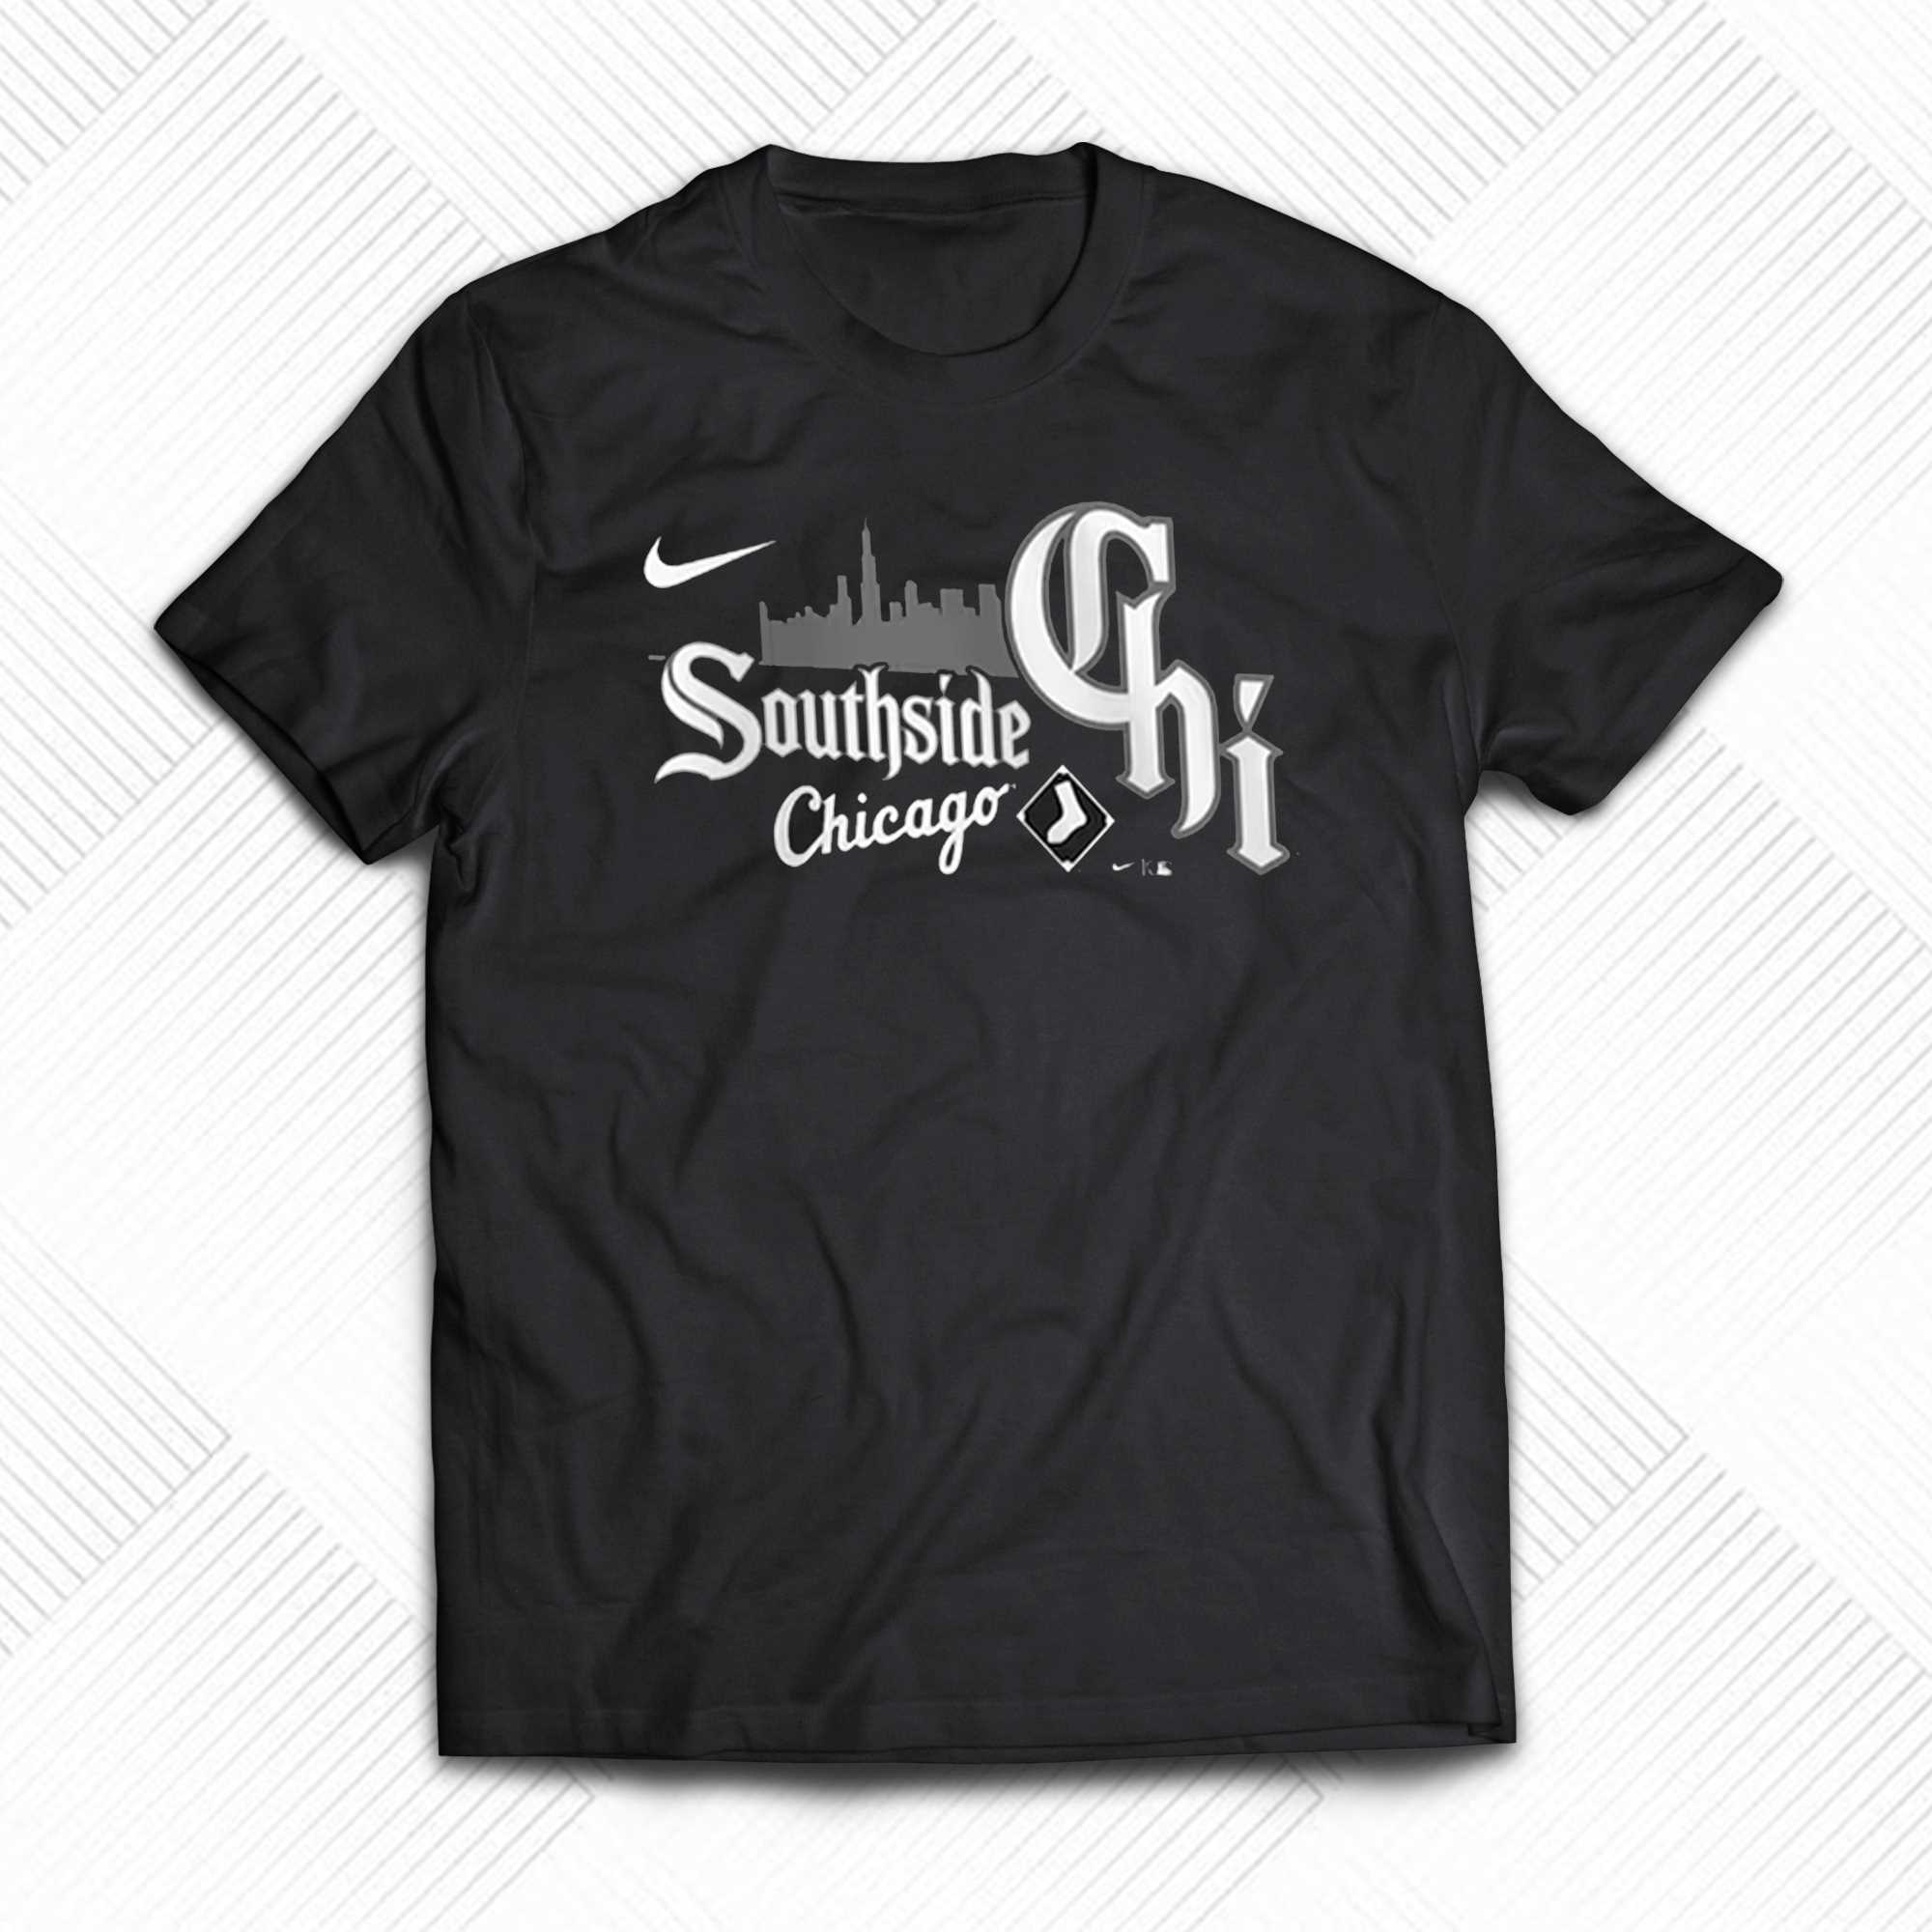 Colorado Rockies City Connect Graphic T-shirt - Shibtee Clothing